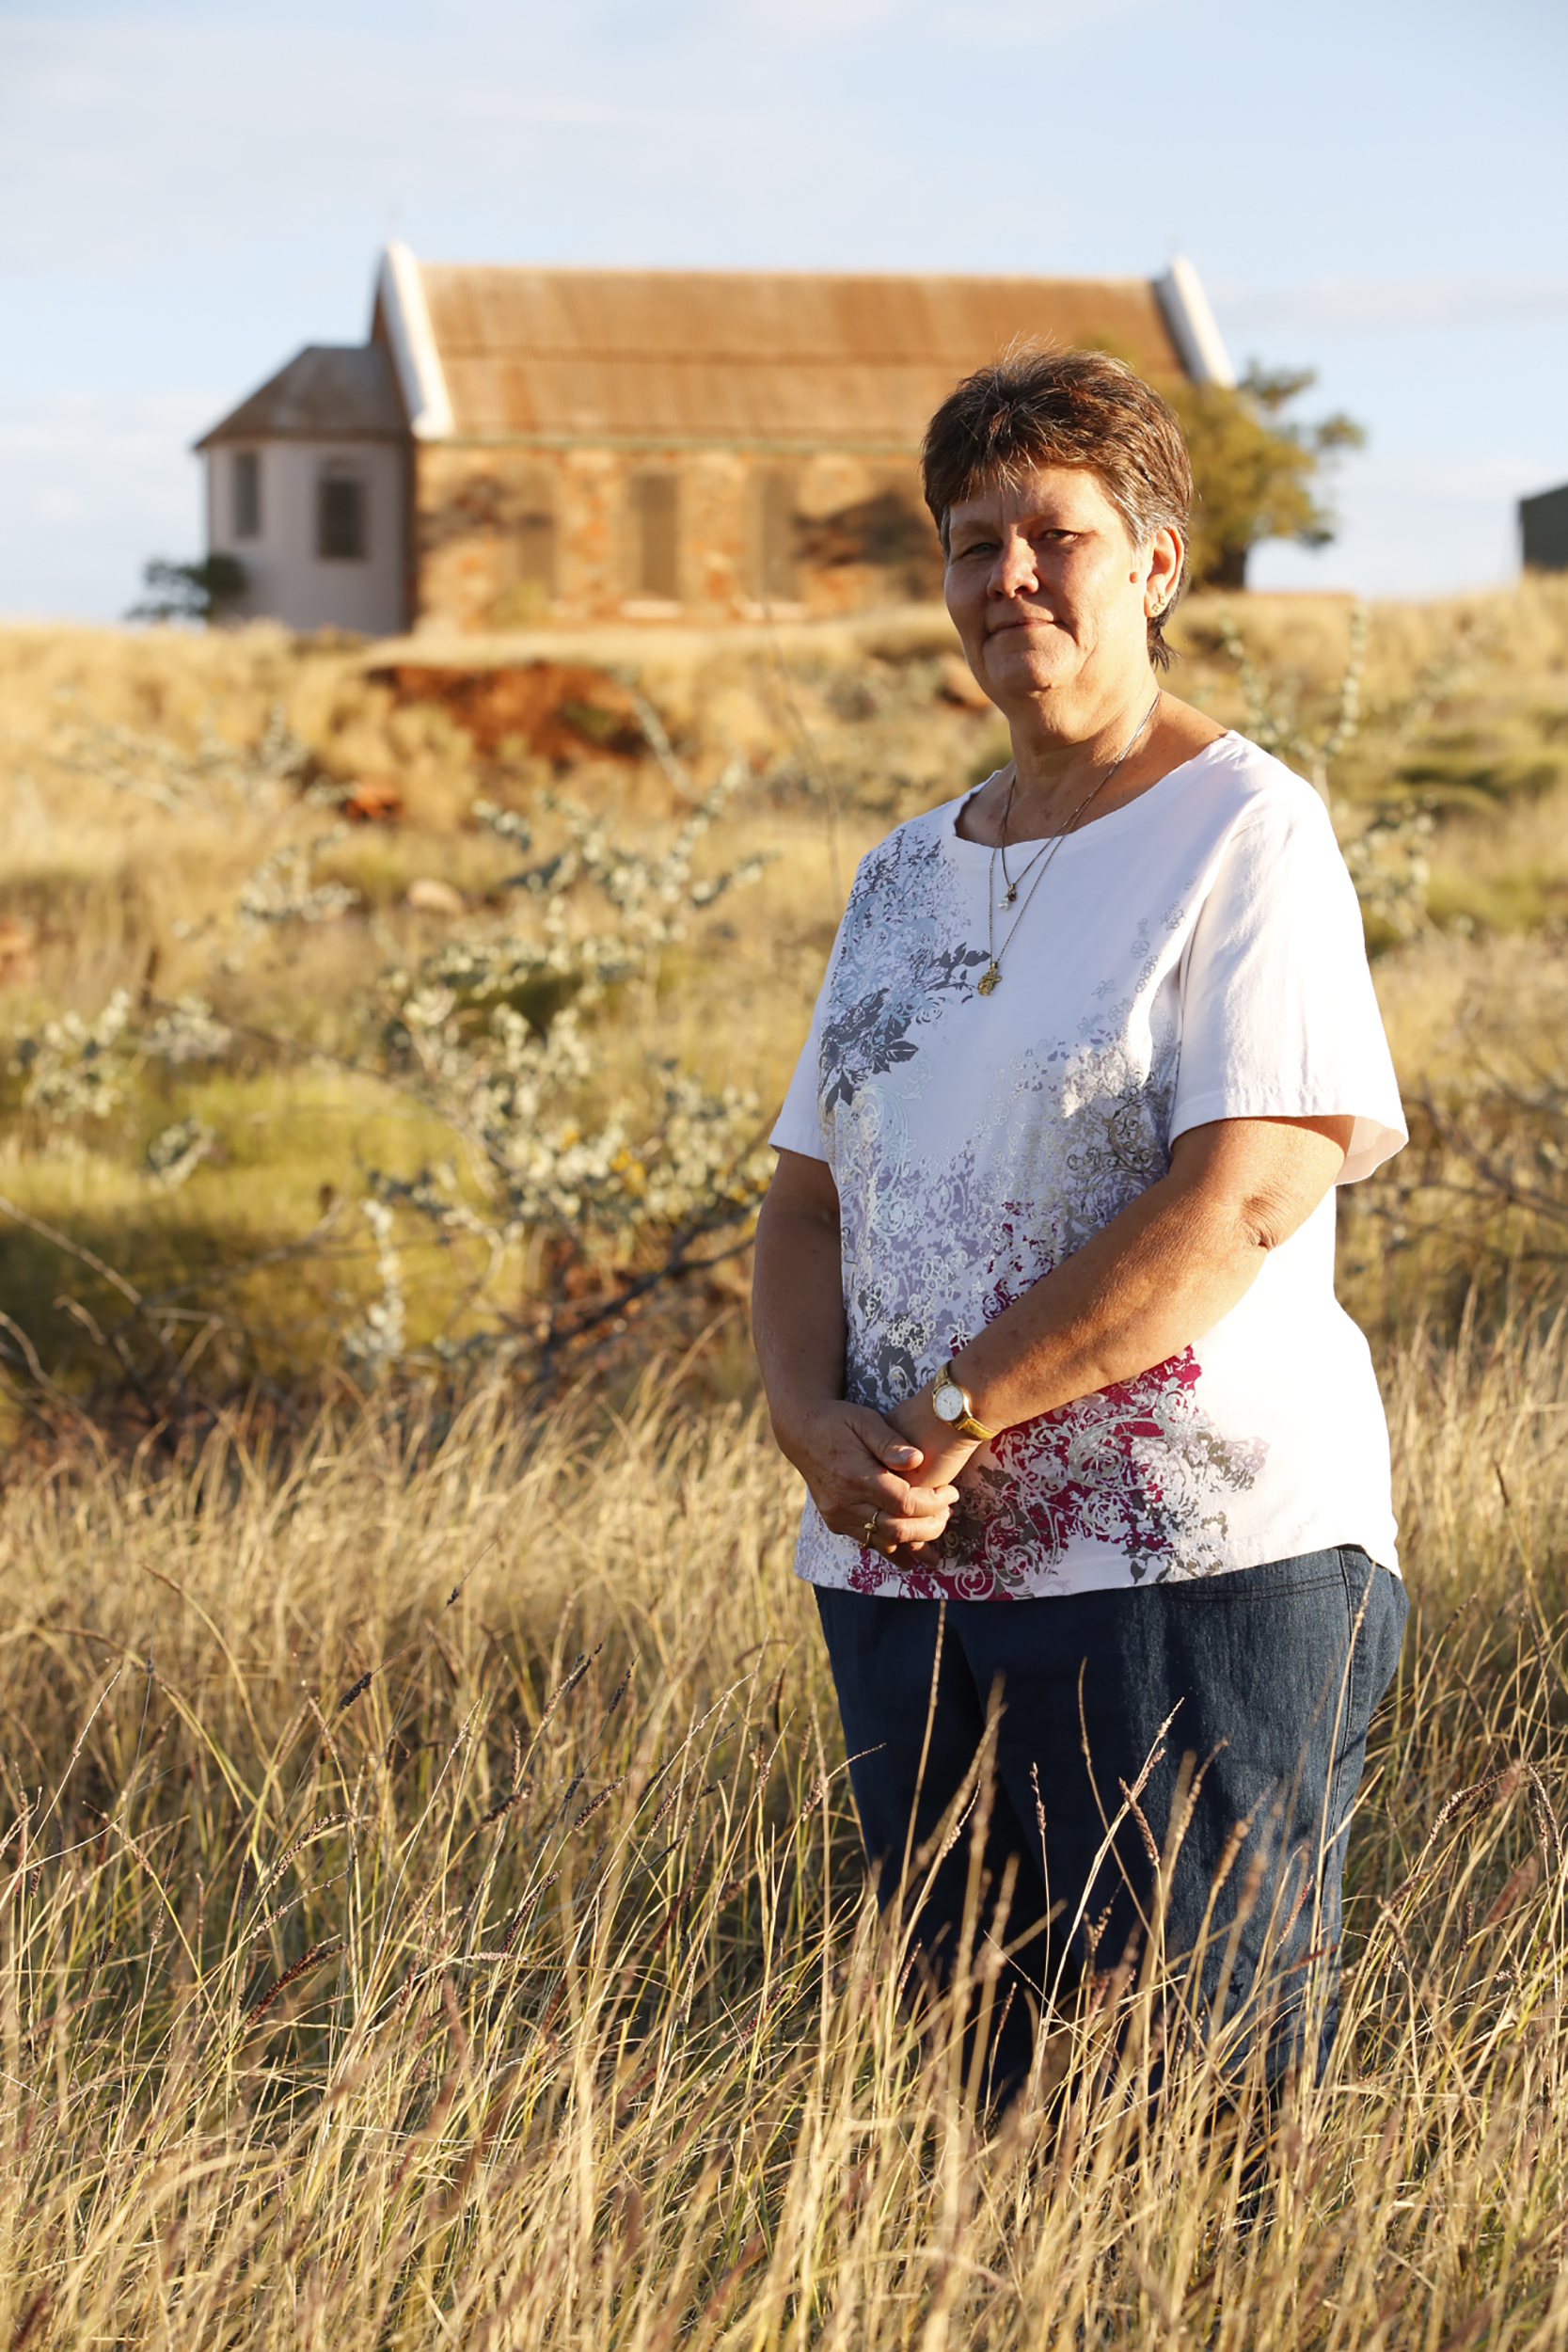  Ruth Ellis, Manager, Roebourne Visitor Centre, 2015.&nbsp; Edition of 3. 